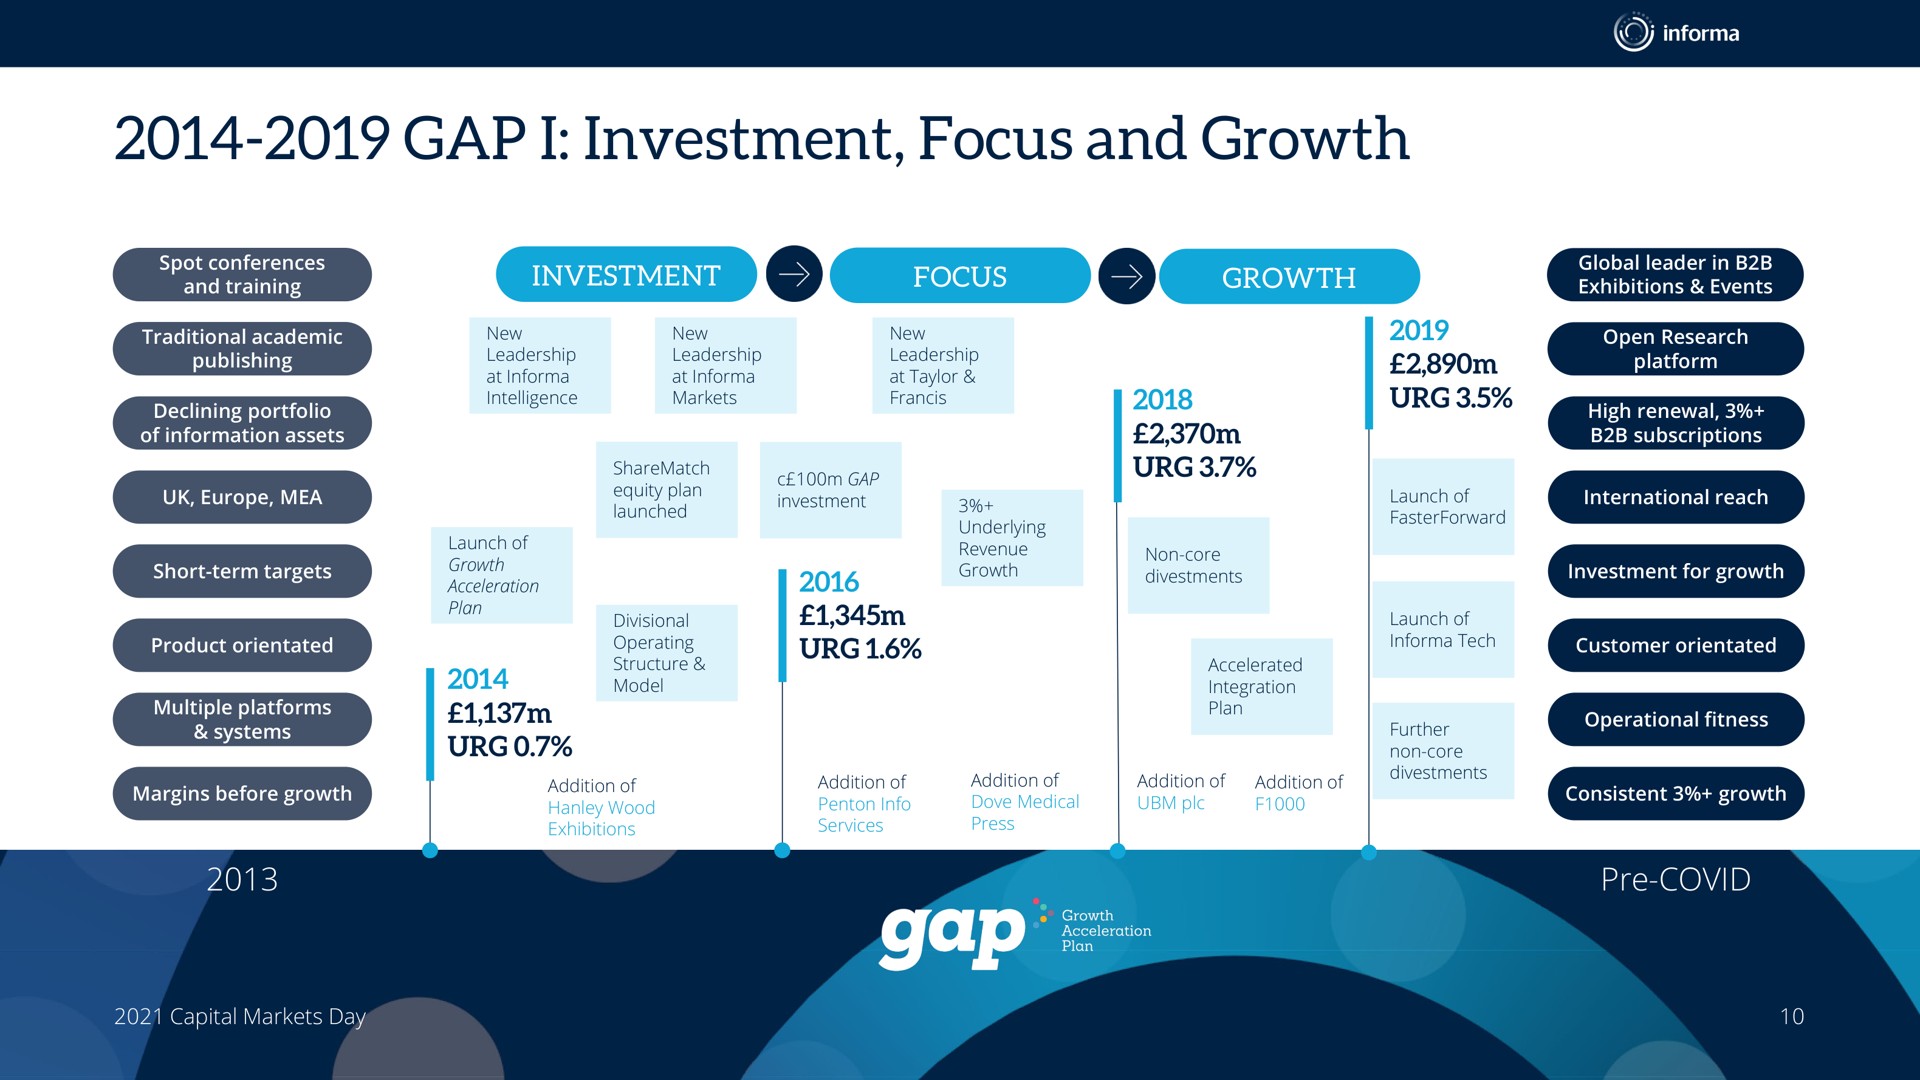 gap i investment focus and growth | Informa